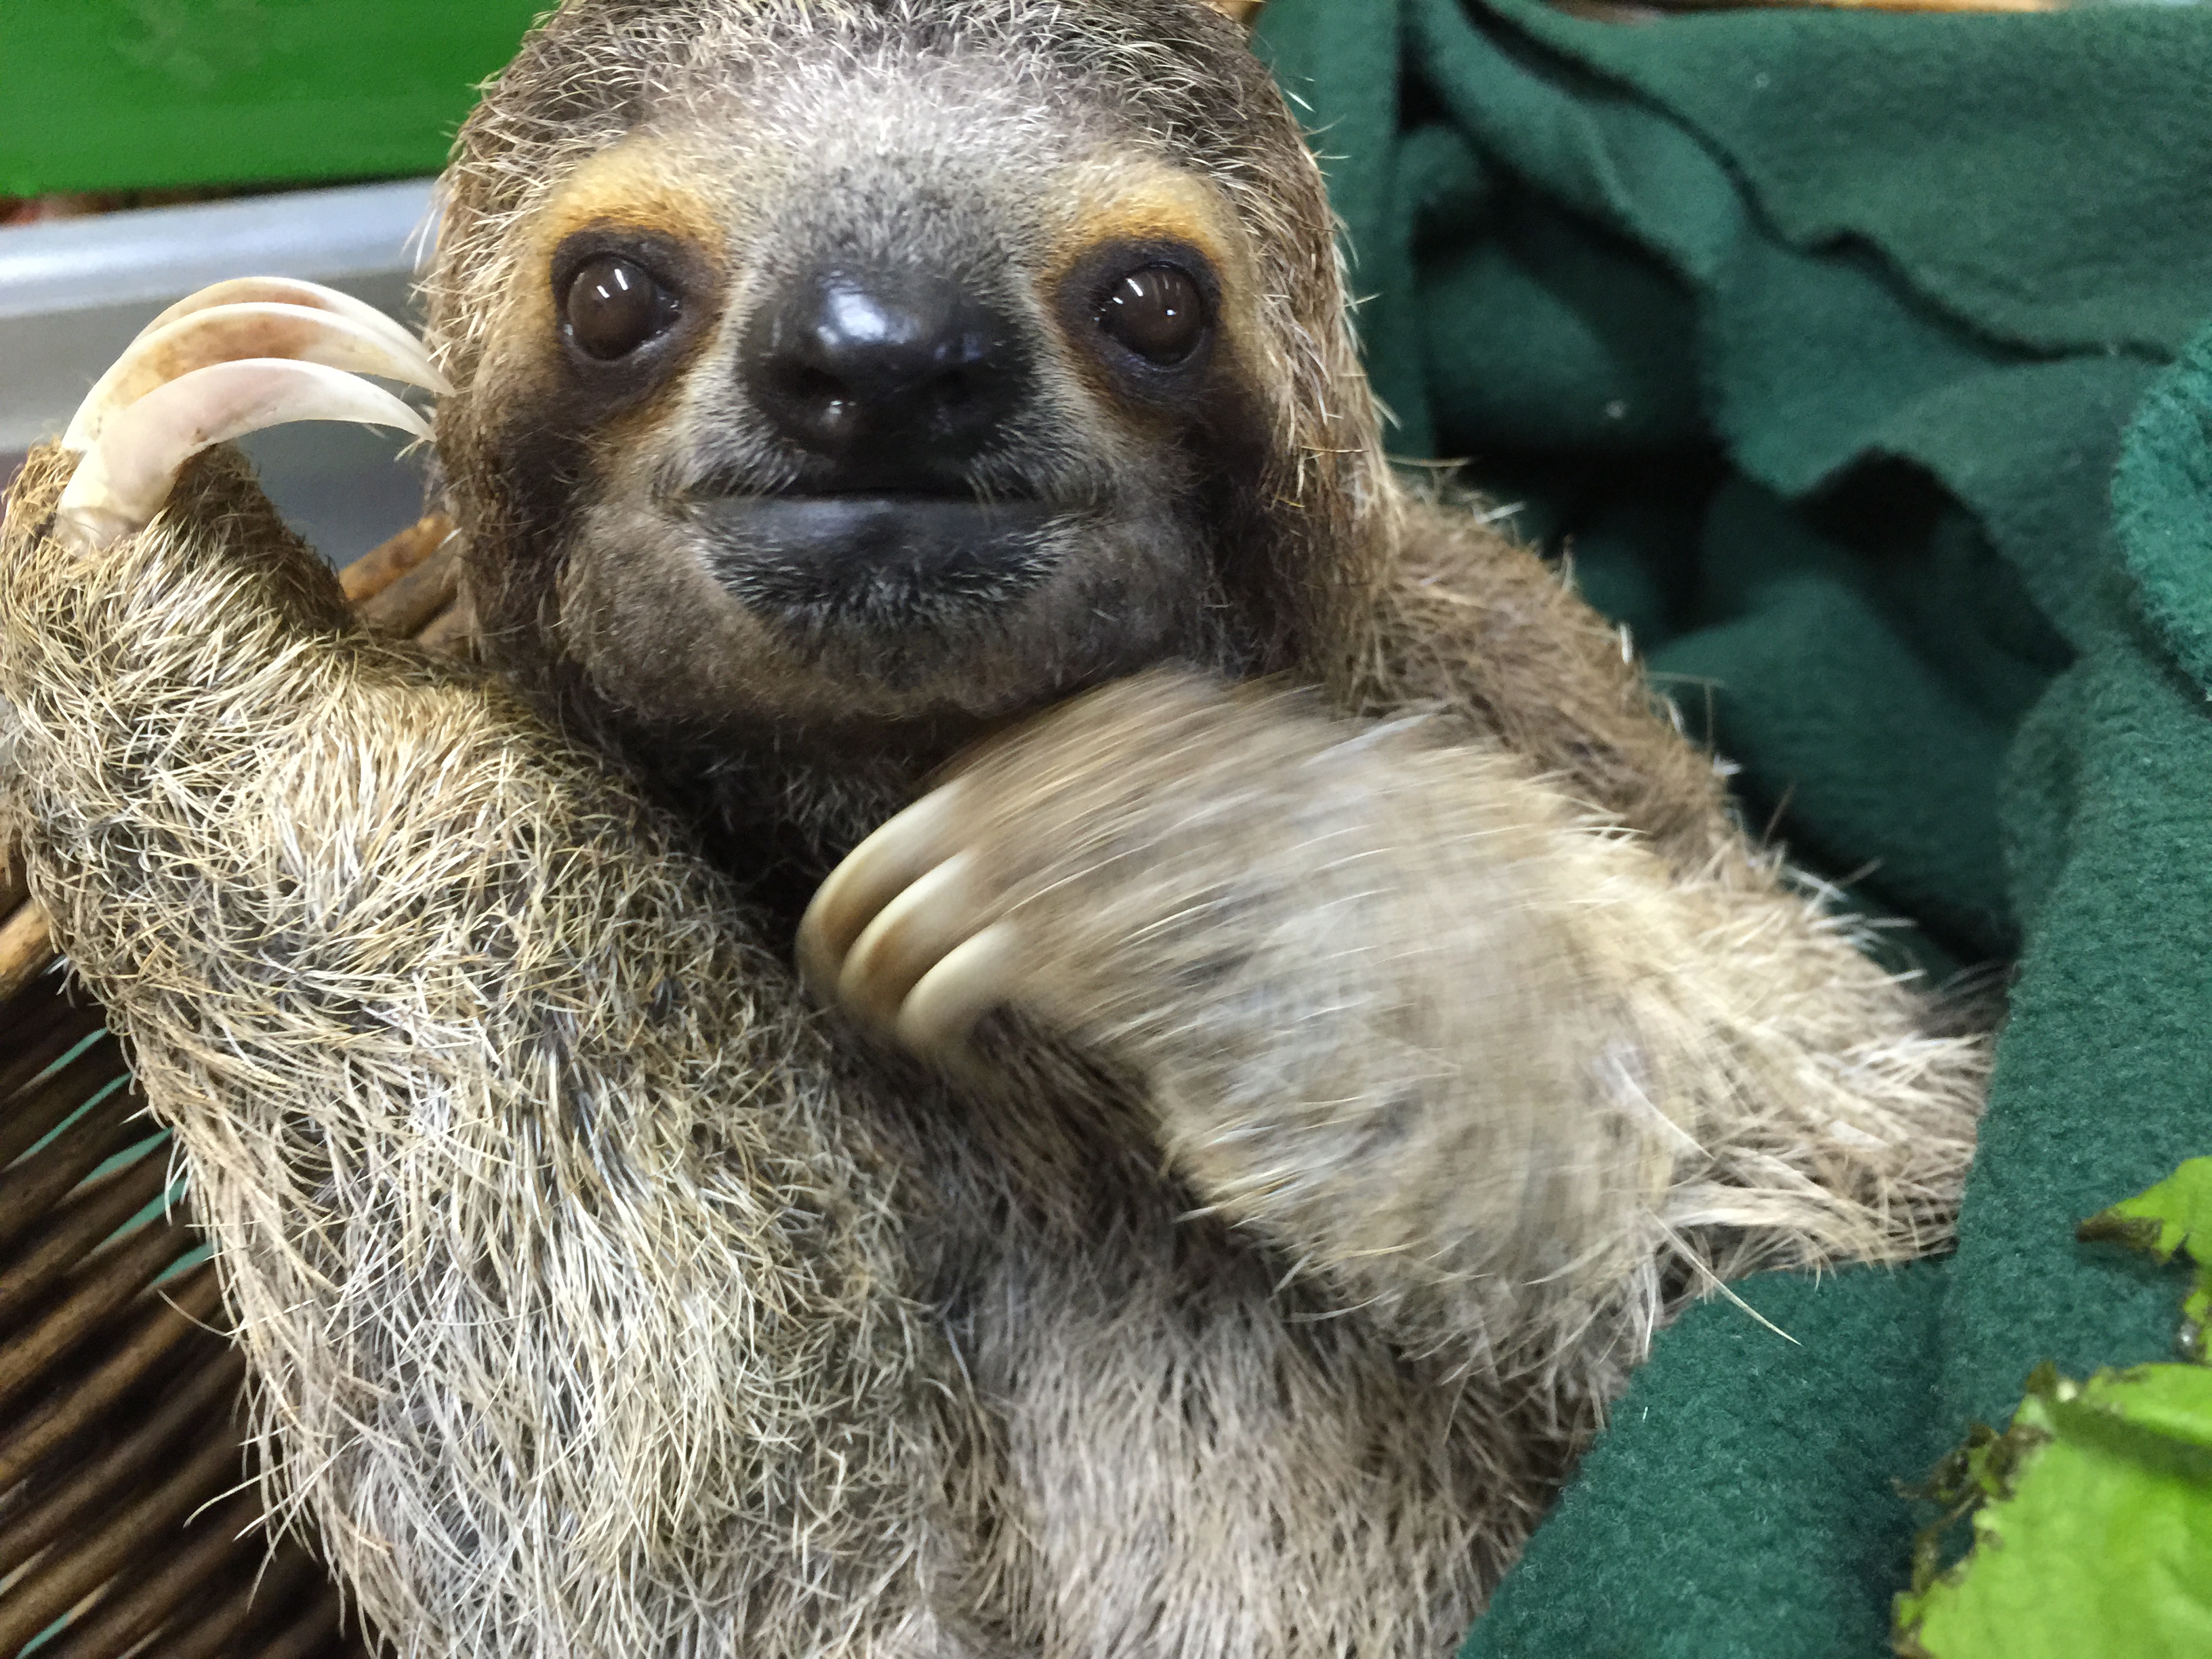 Sloth traditions and reflections by The Sloth Institute #BorntobeWild